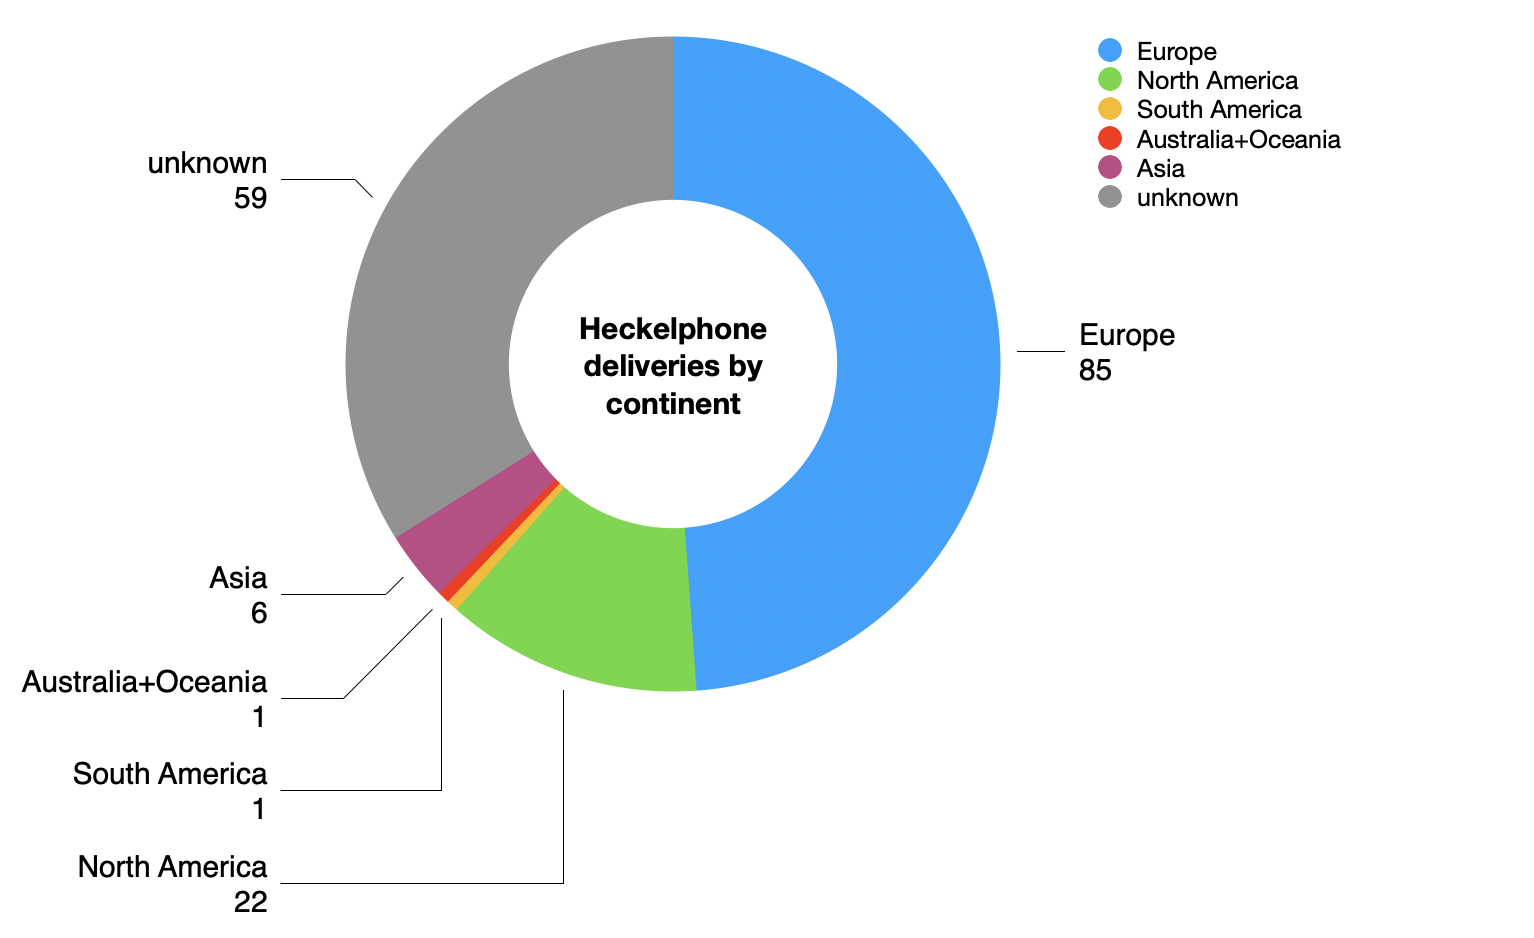 Heckelphone deliveries by continent